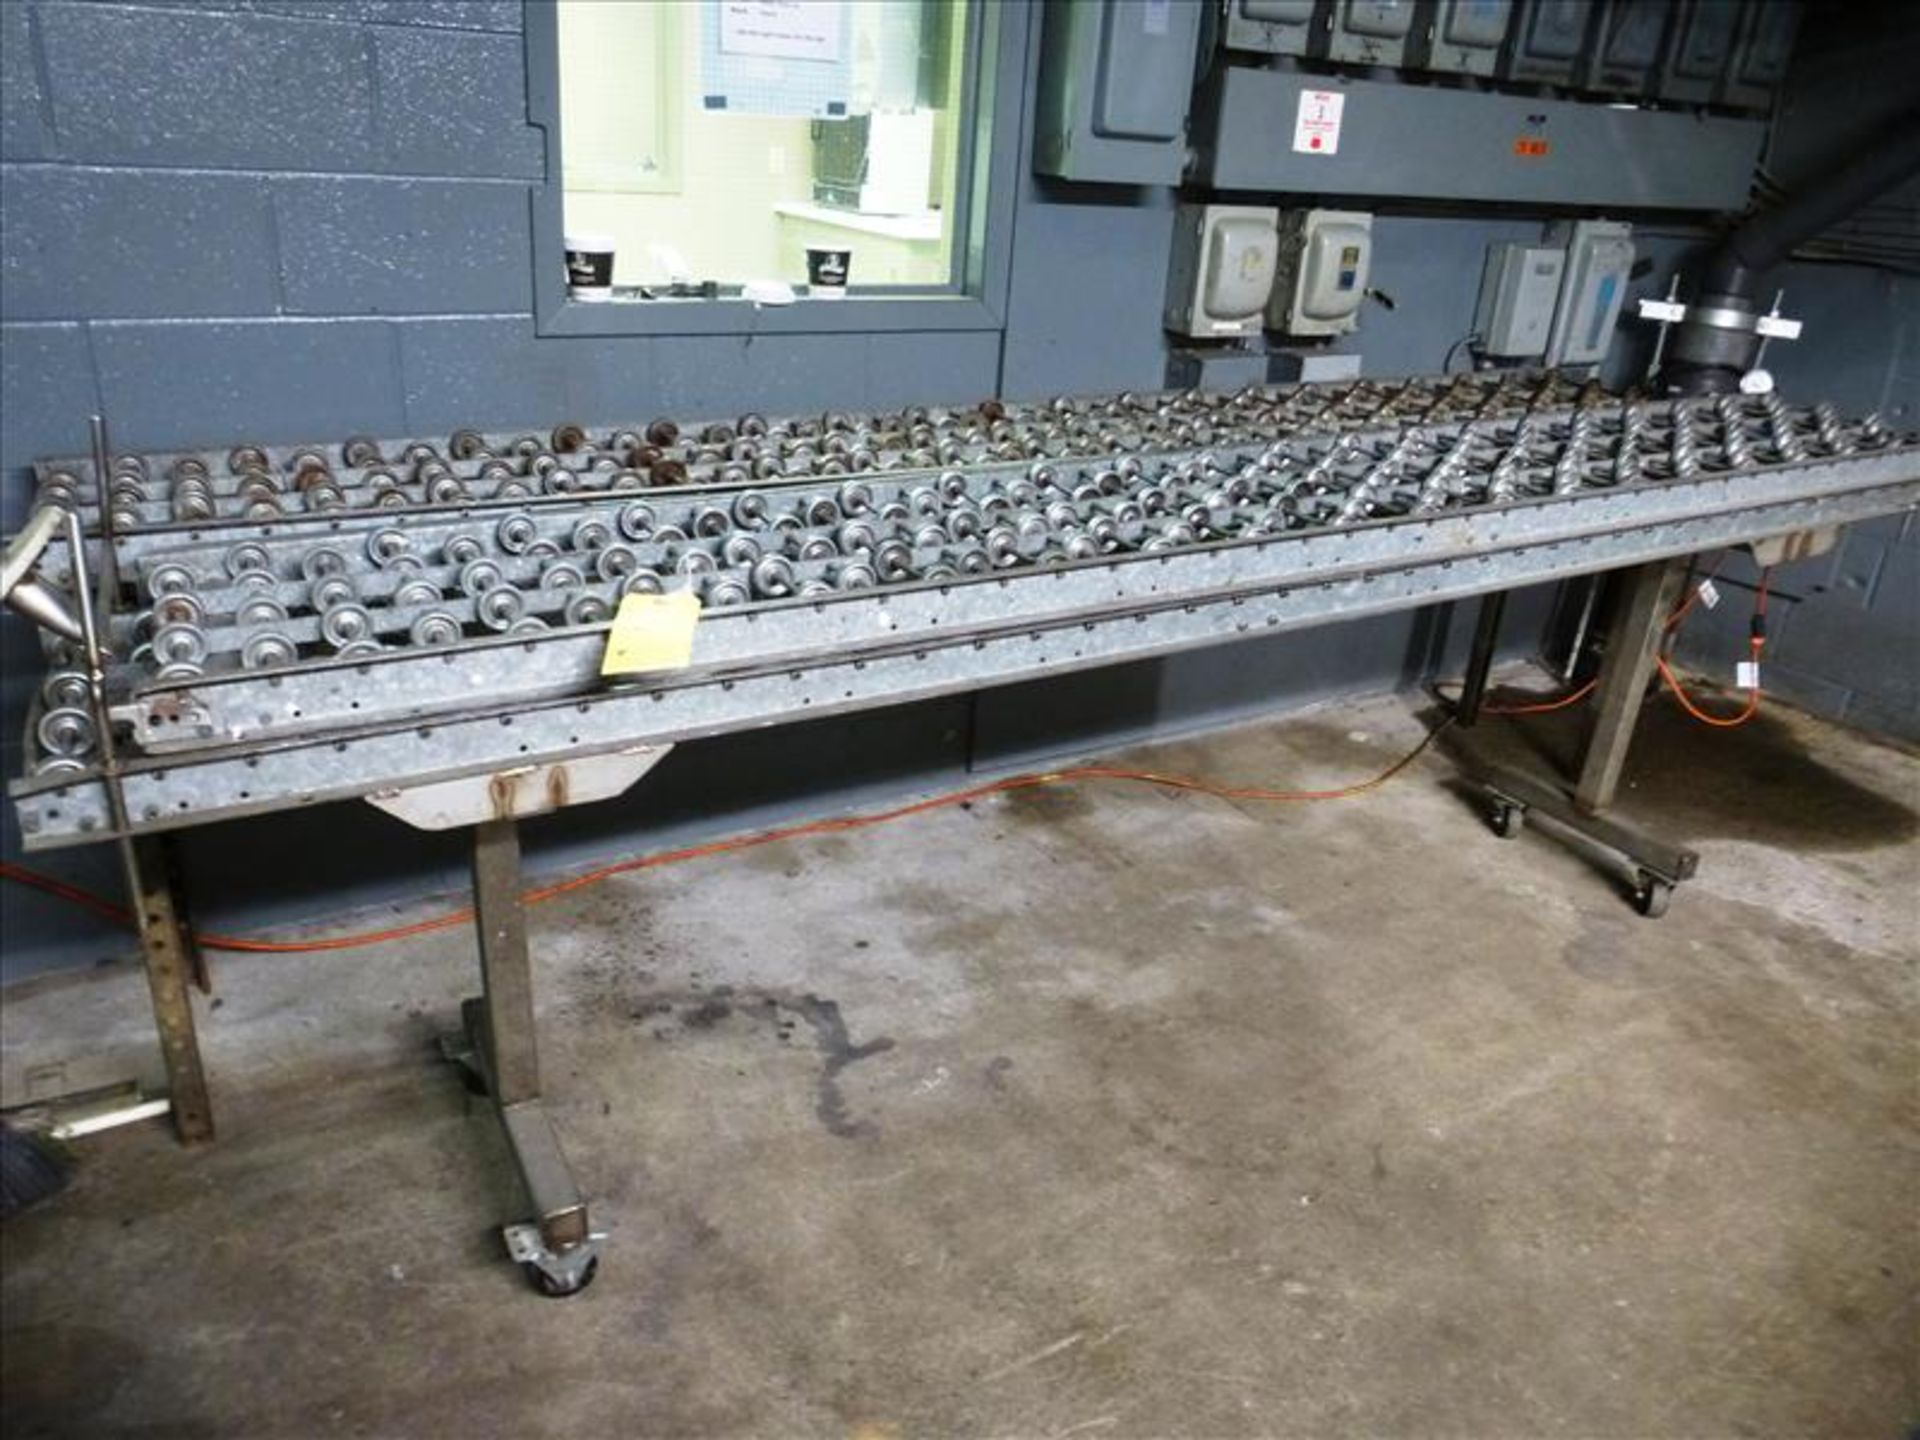 (3) sections of skate conveyor